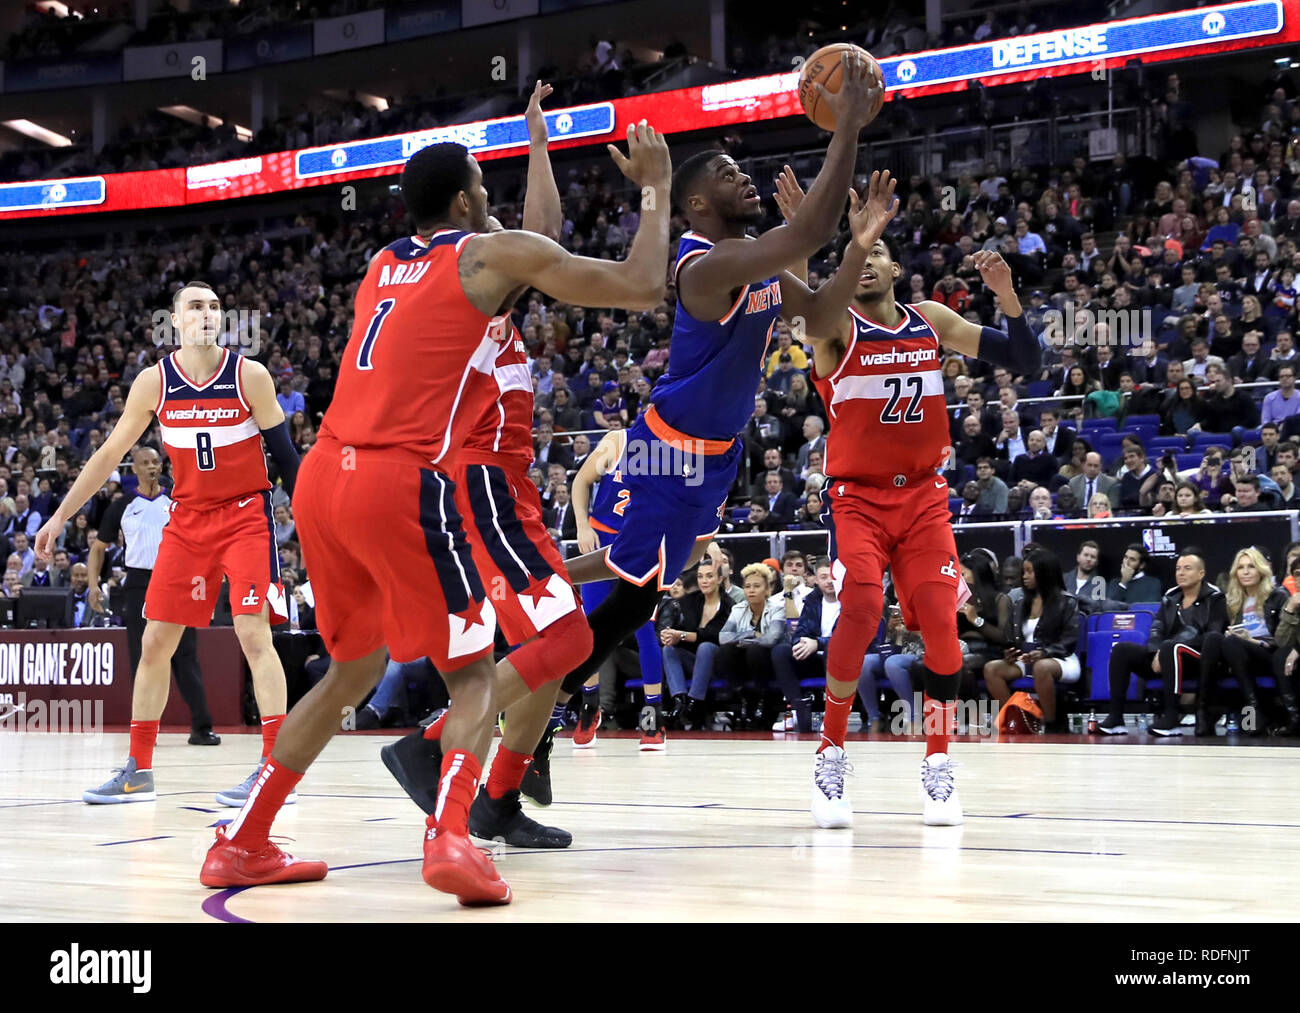 New York Knicks' Emmanuel Mudiay dives for the basket during the NBA London Game 2019 at the O2 Arena, London. Stock Photo